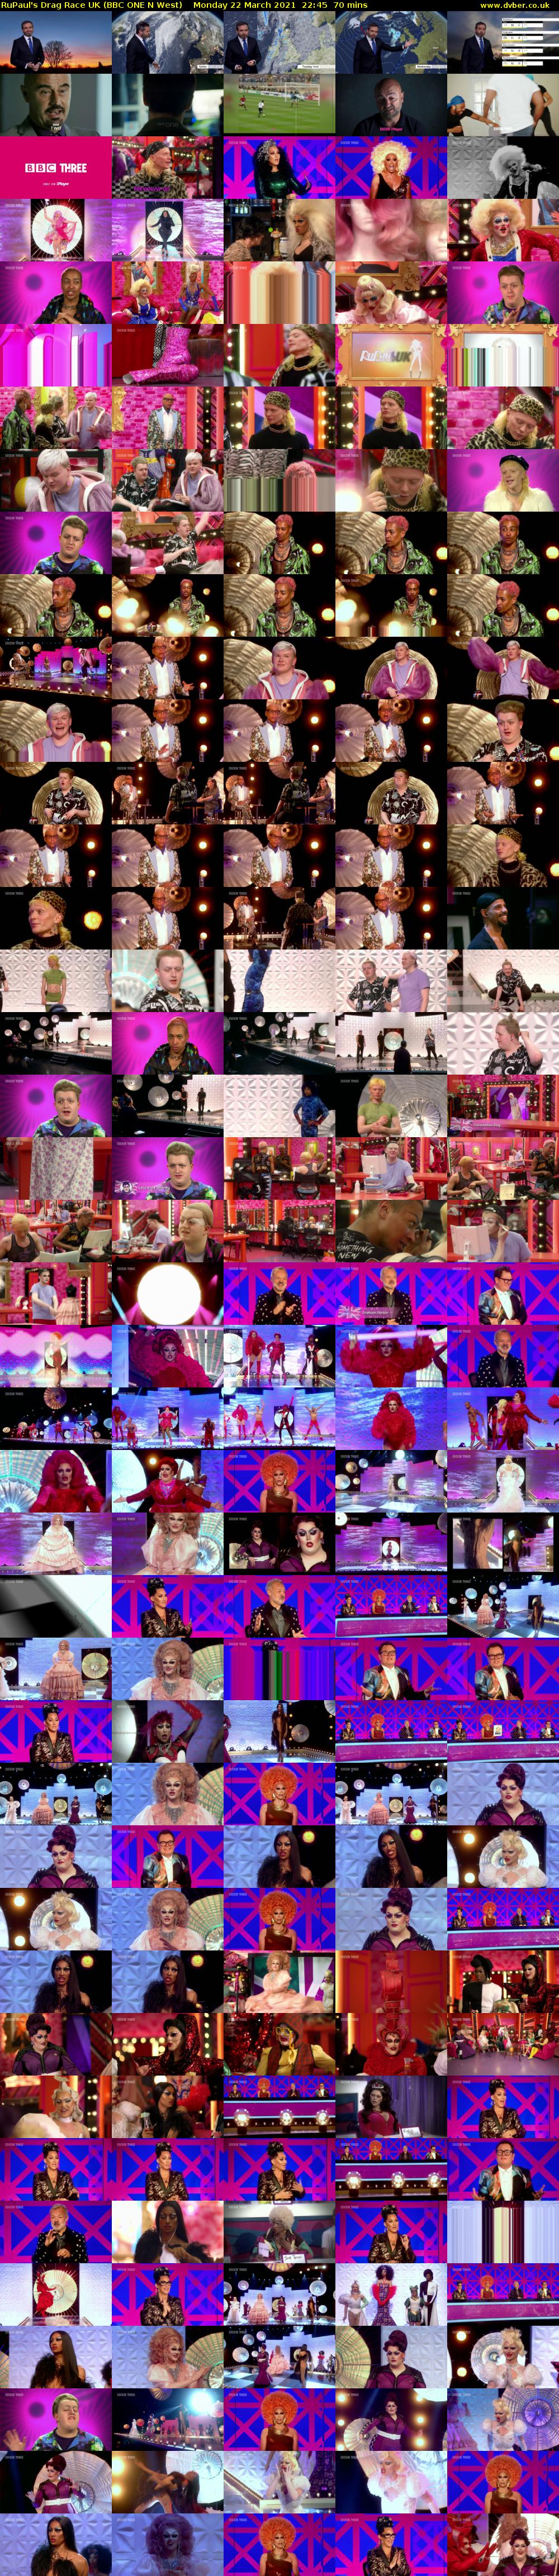 RuPaul's Drag Race UK (BBC ONE N West) Monday 22 March 2021 22:45 - 23:55